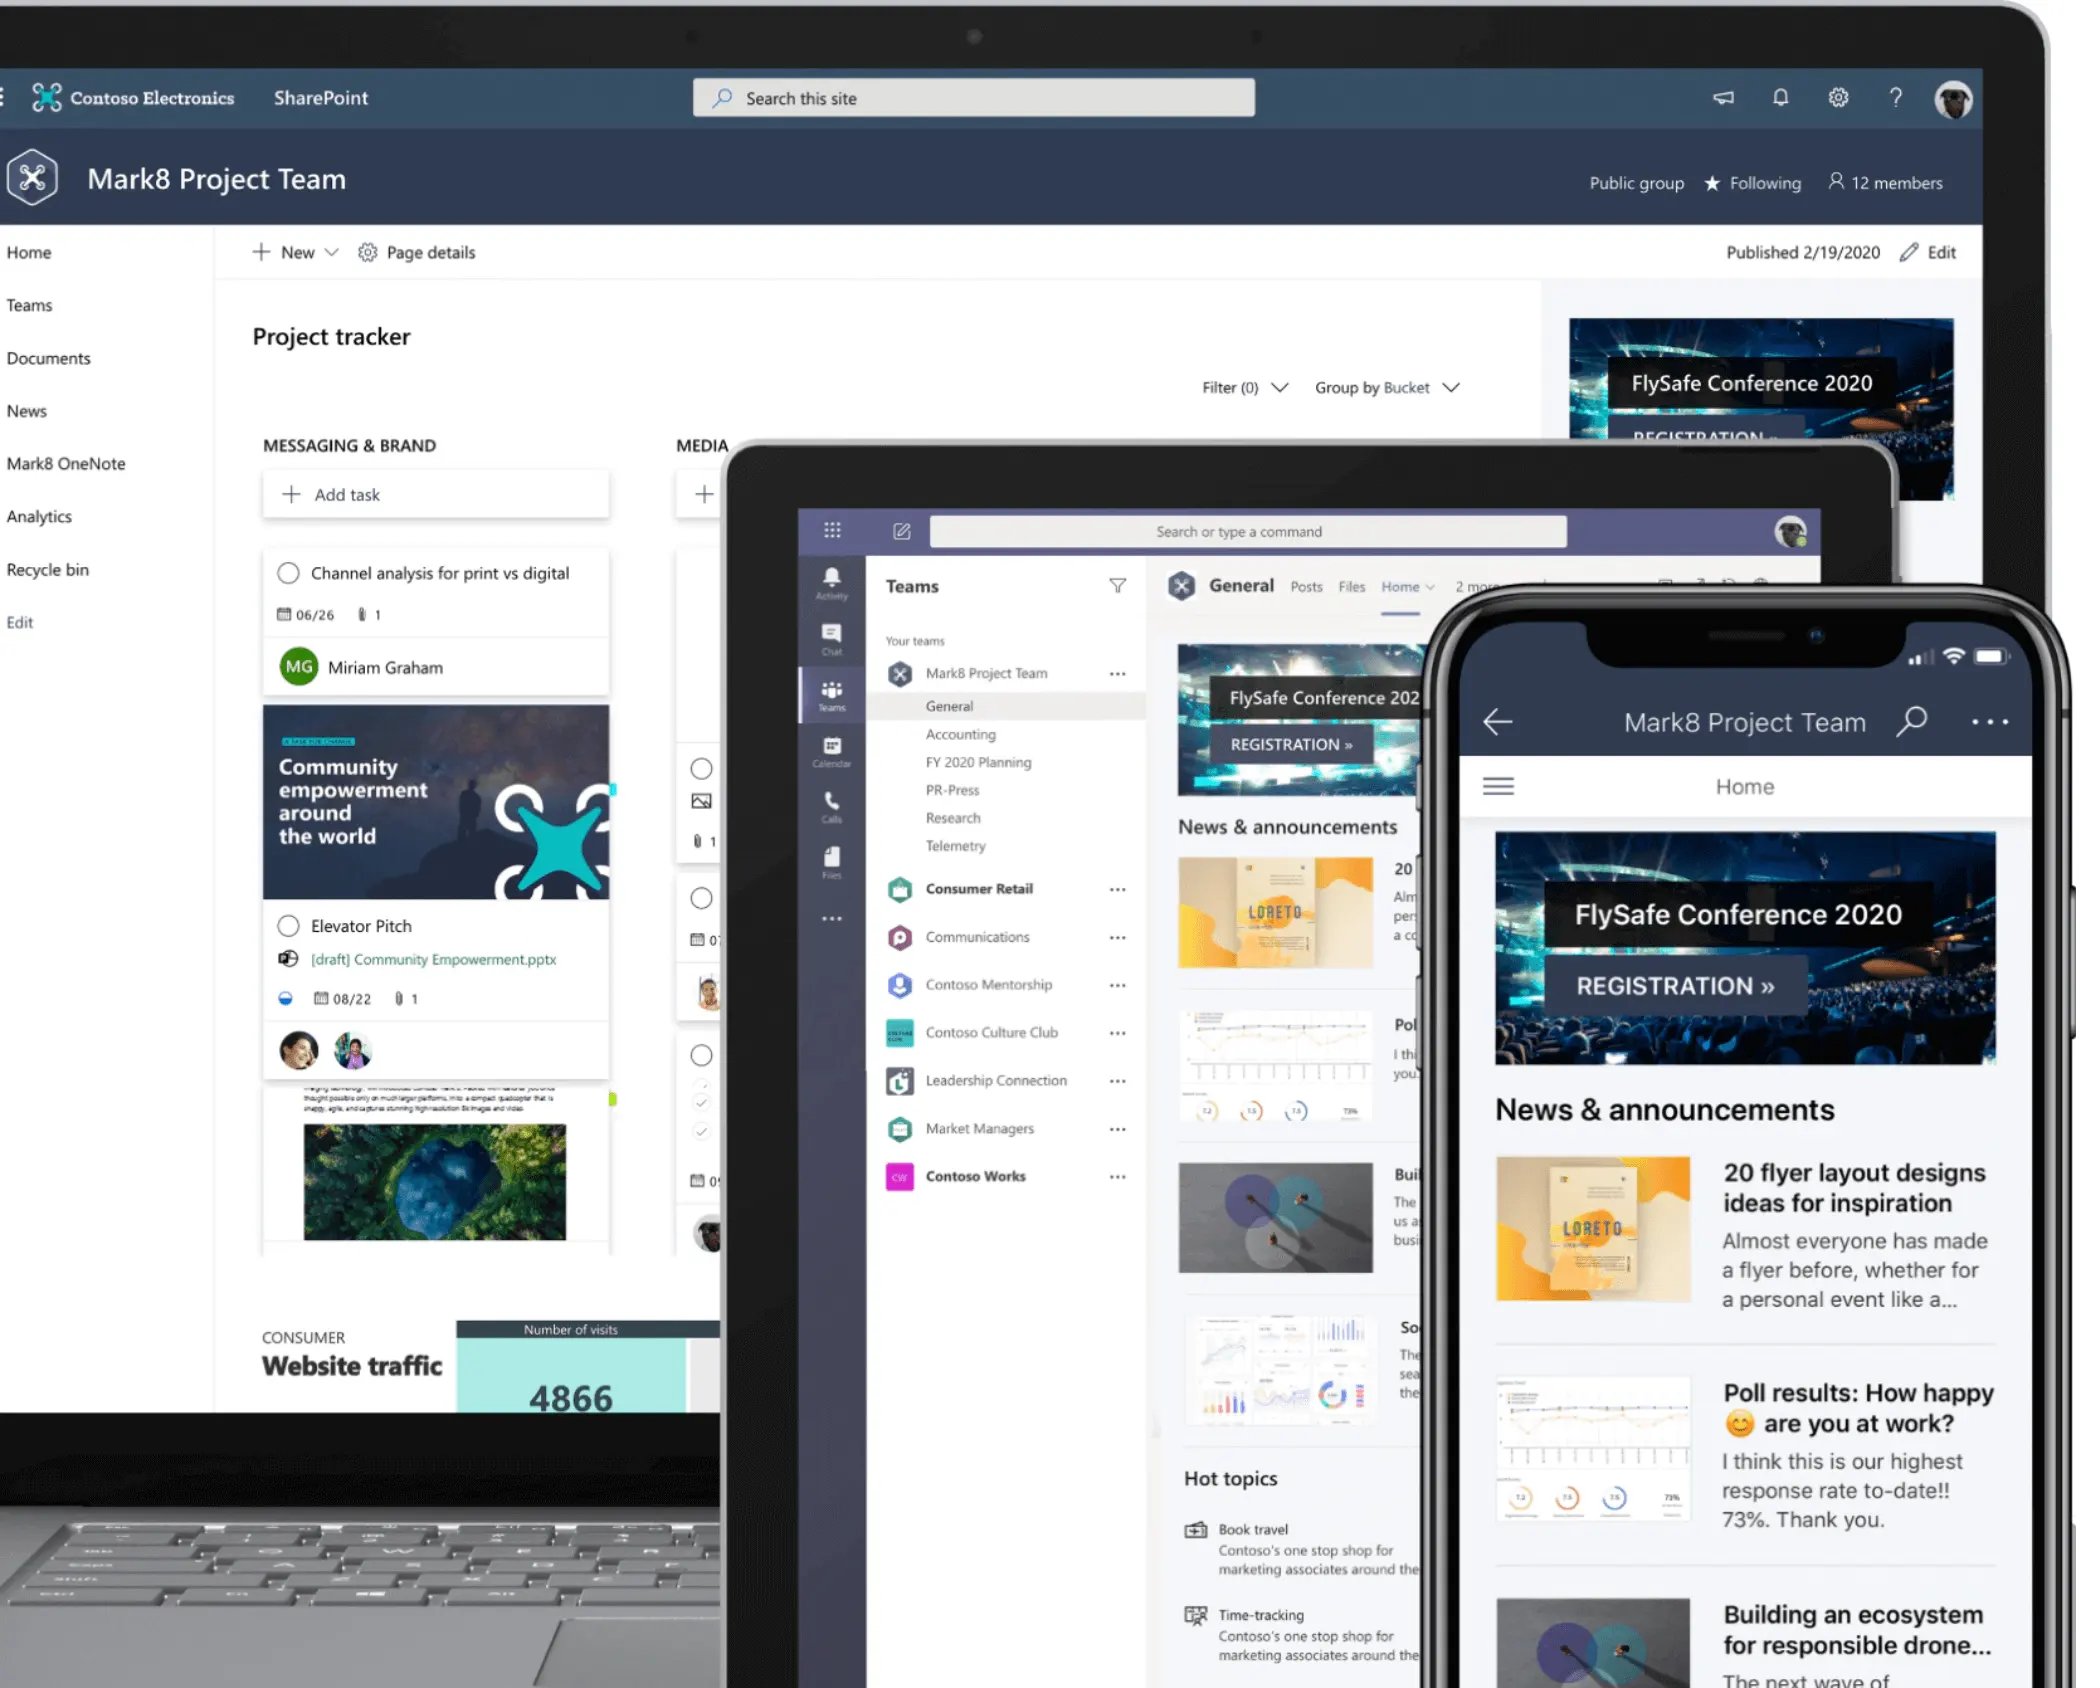 SharePoint Intranet governance: a key business in your digital workplace